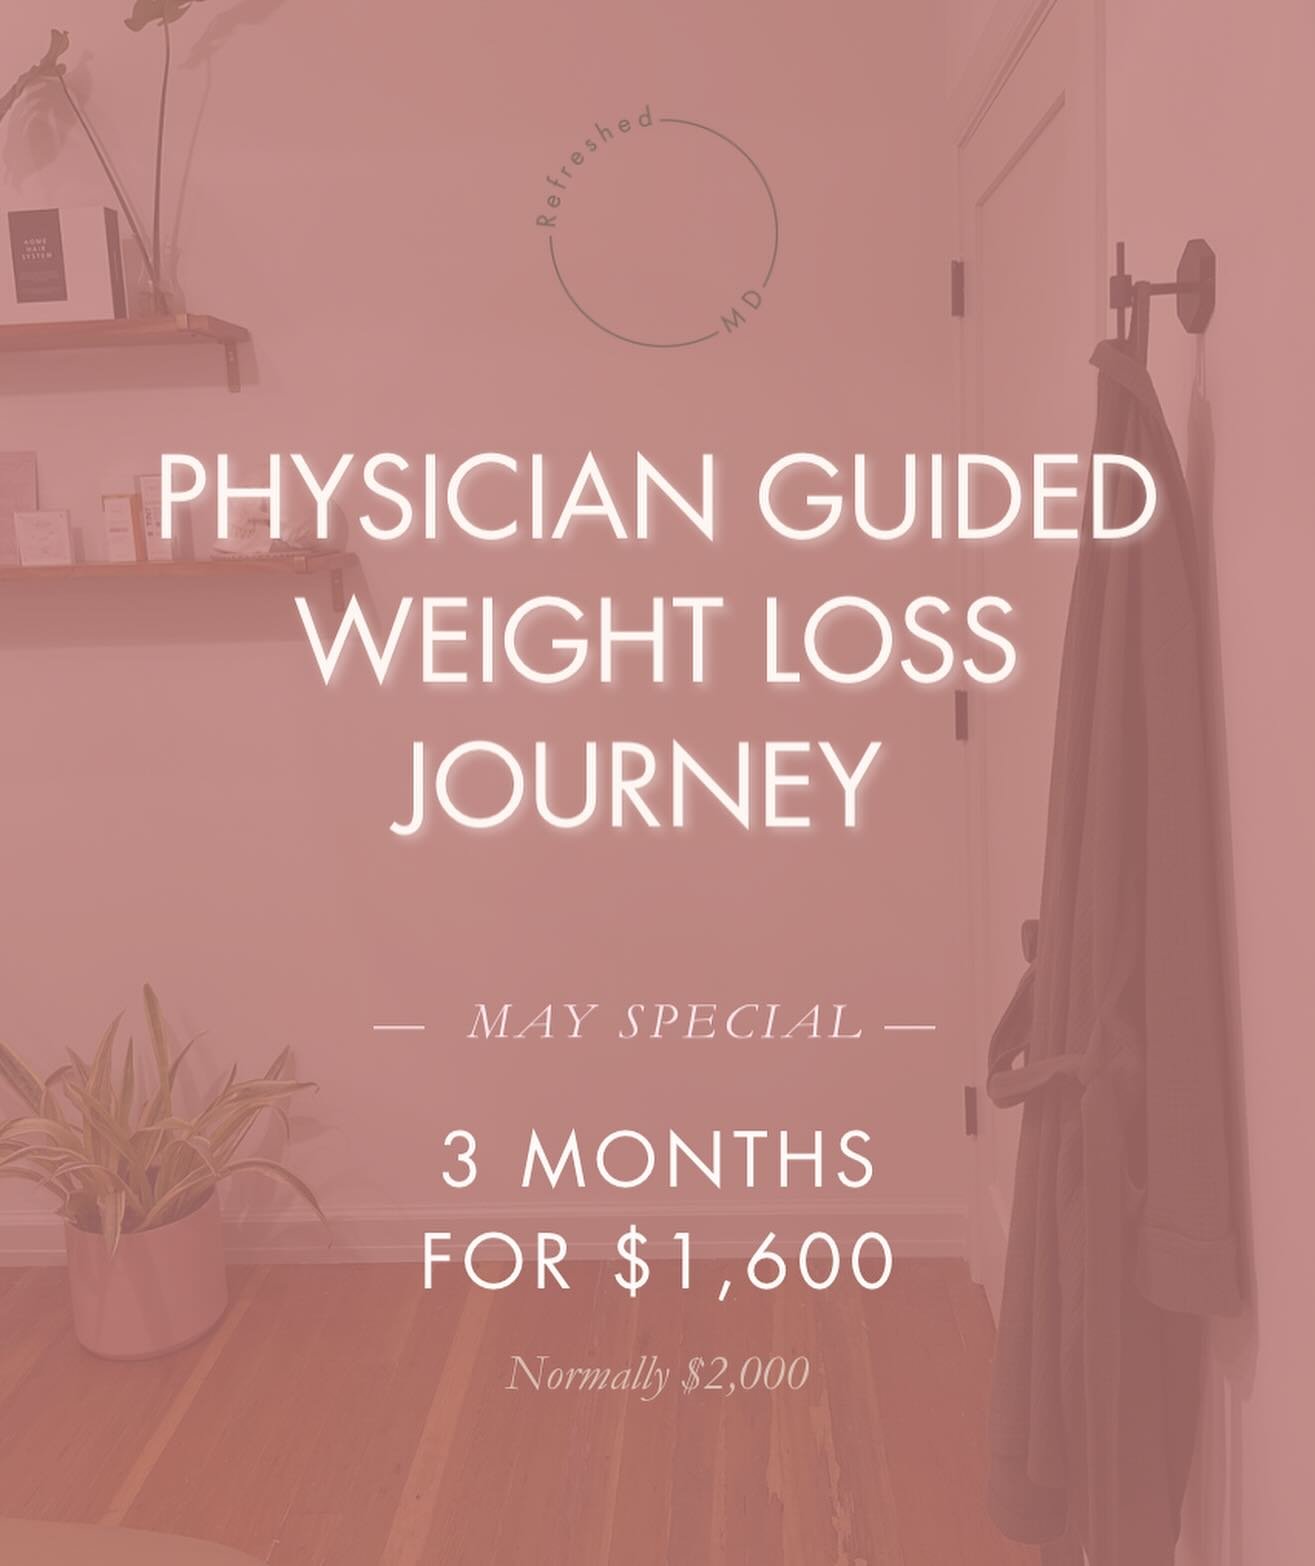 If you've been curious about our Weight Loss Program, this month is a great time to dive in! 

We are offering a reduced rate for our Weight Loss Journey 💫 3 month guided Weight Loss for $1,600 💫

What is included?
Physician Expertise 
Nutritional 